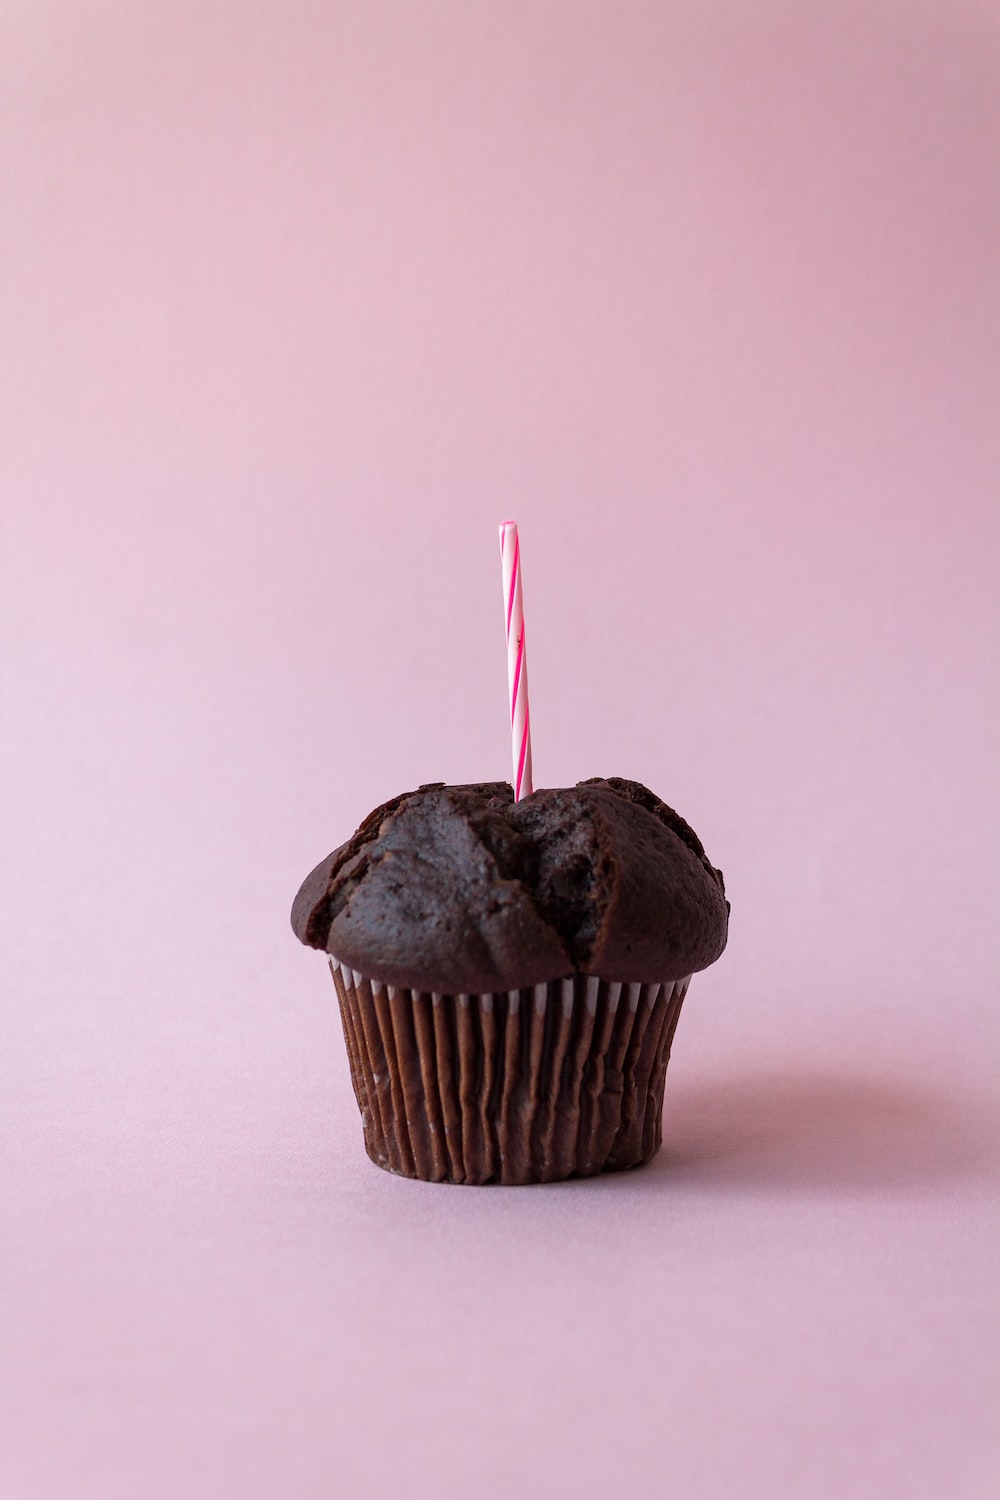 a cupcake with a straw